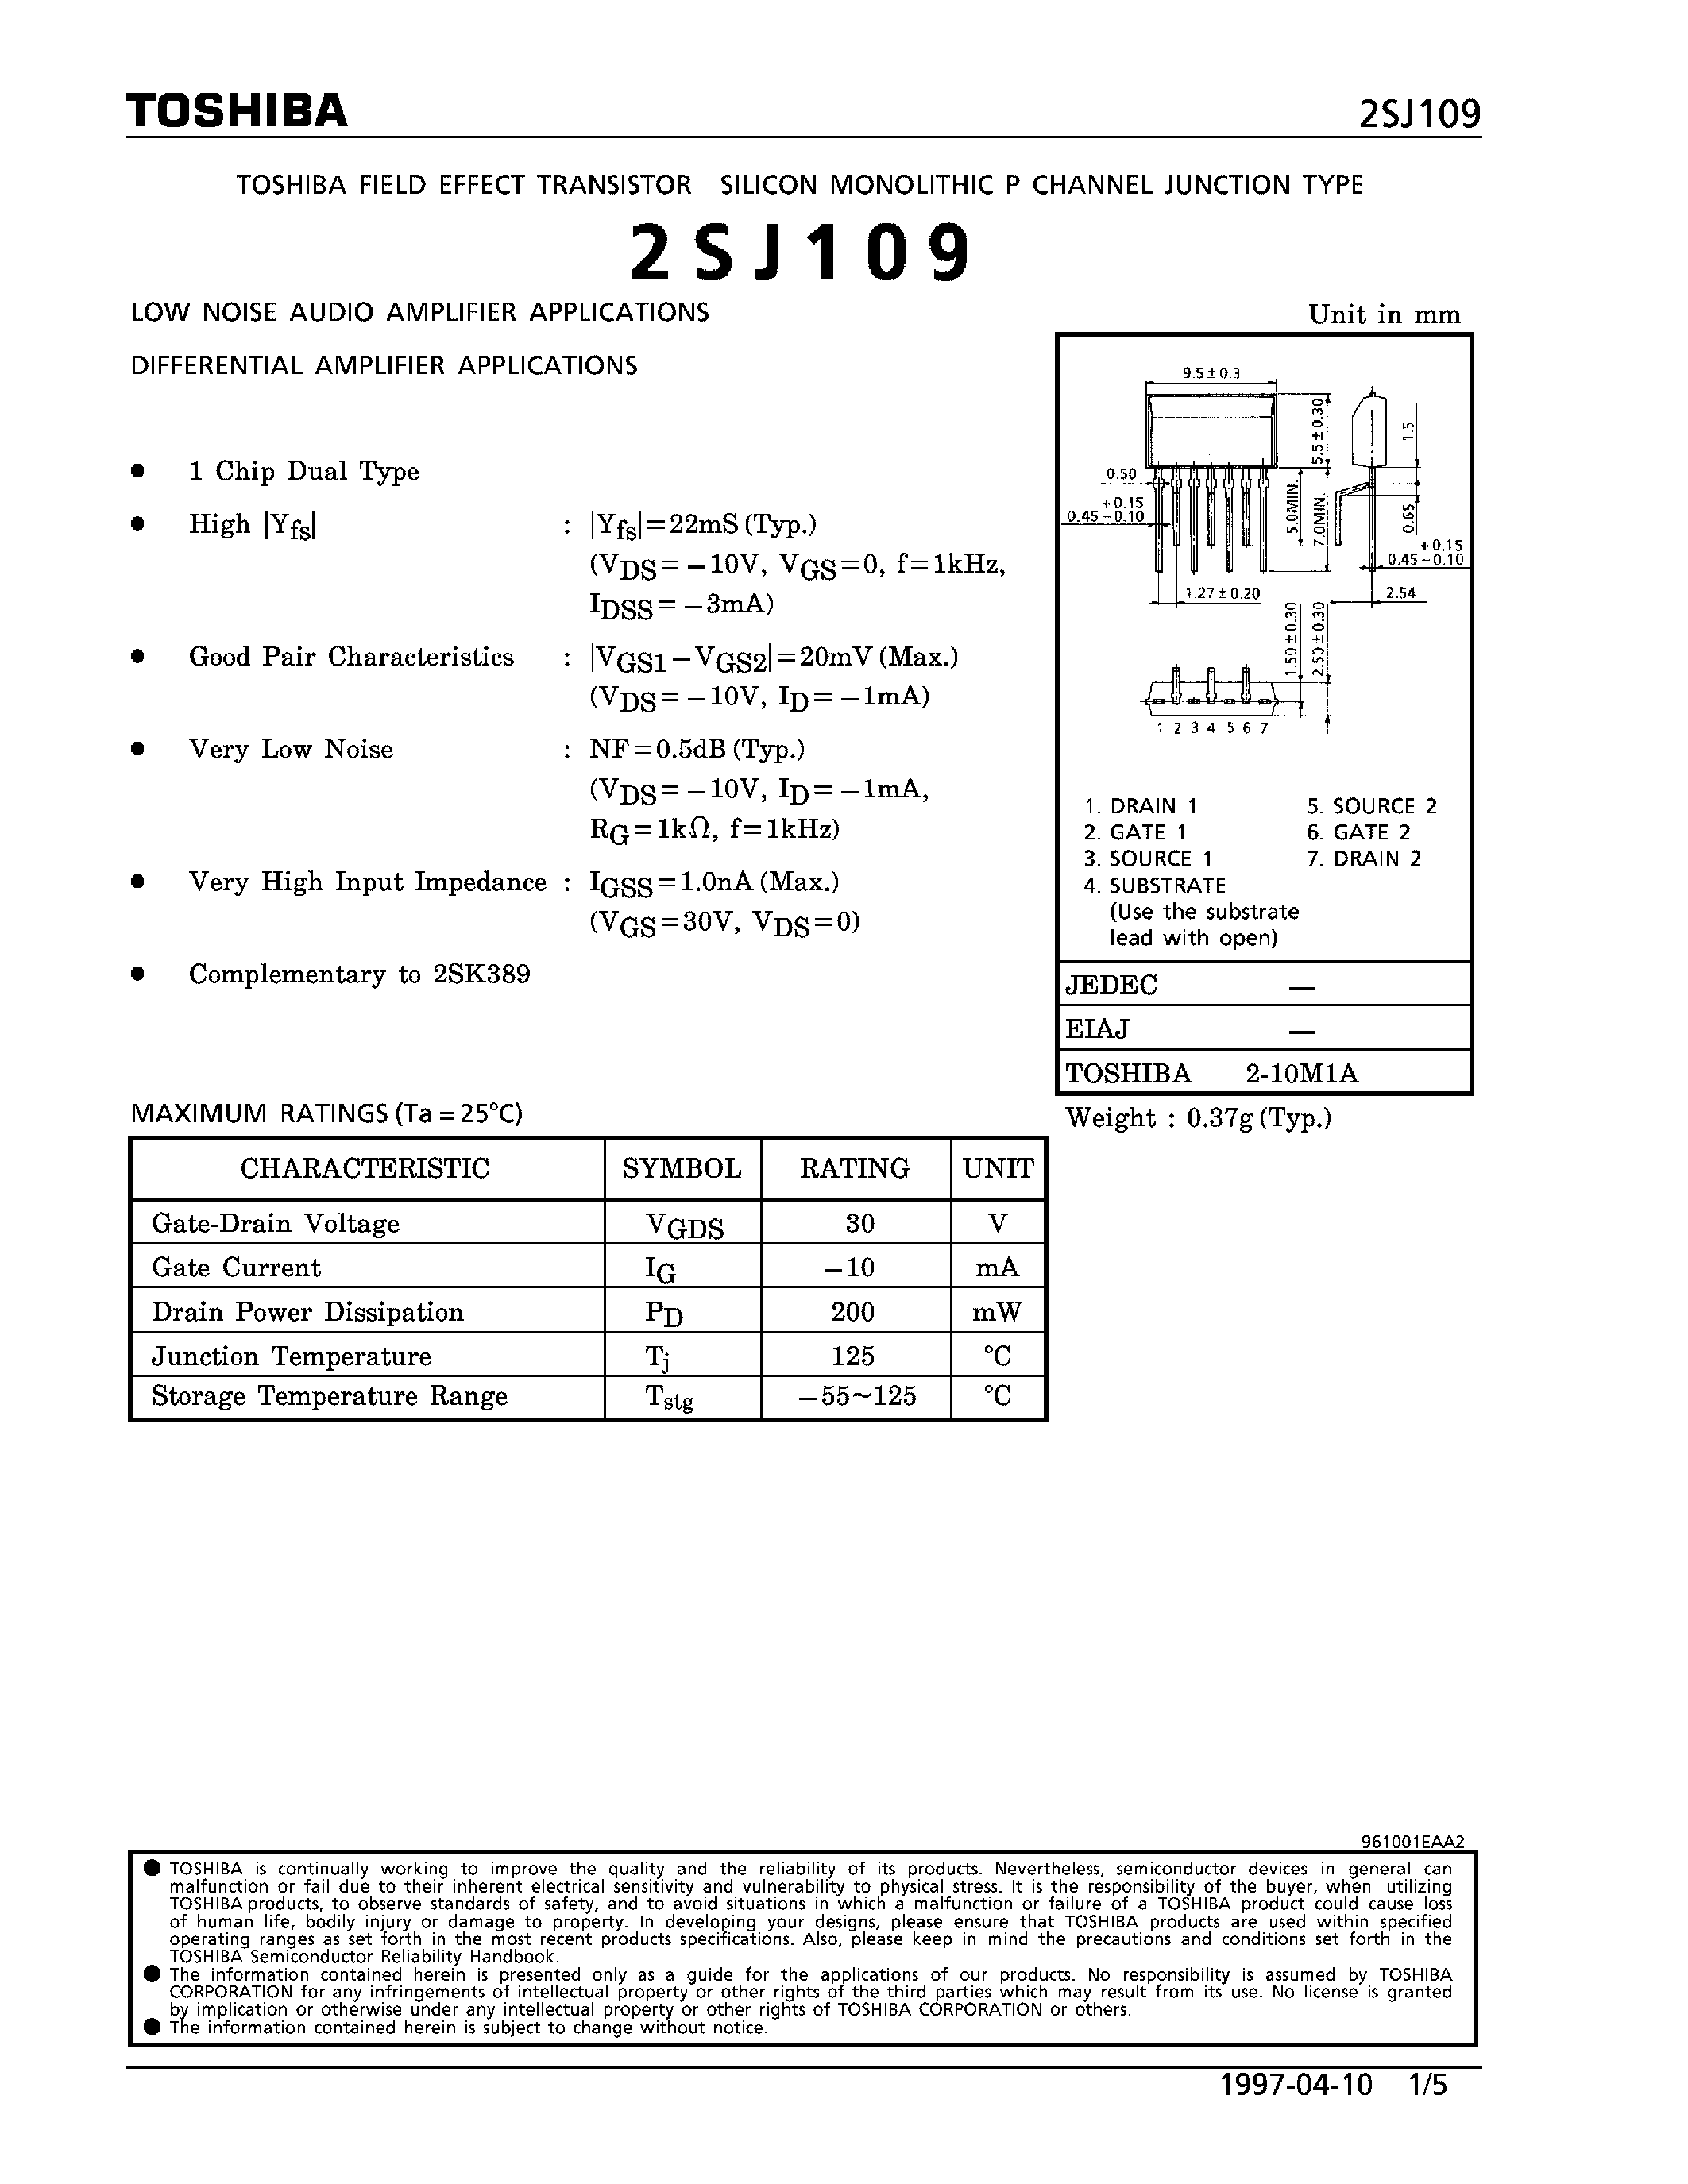 Datasheet 2SJ109 - P CAHNNEL JUNCTION TYPE (LOW NOISE AUDIO AMPLIFIER/ DIFFERENTIAL AMPLIFIER APPLICATIONS) page 1